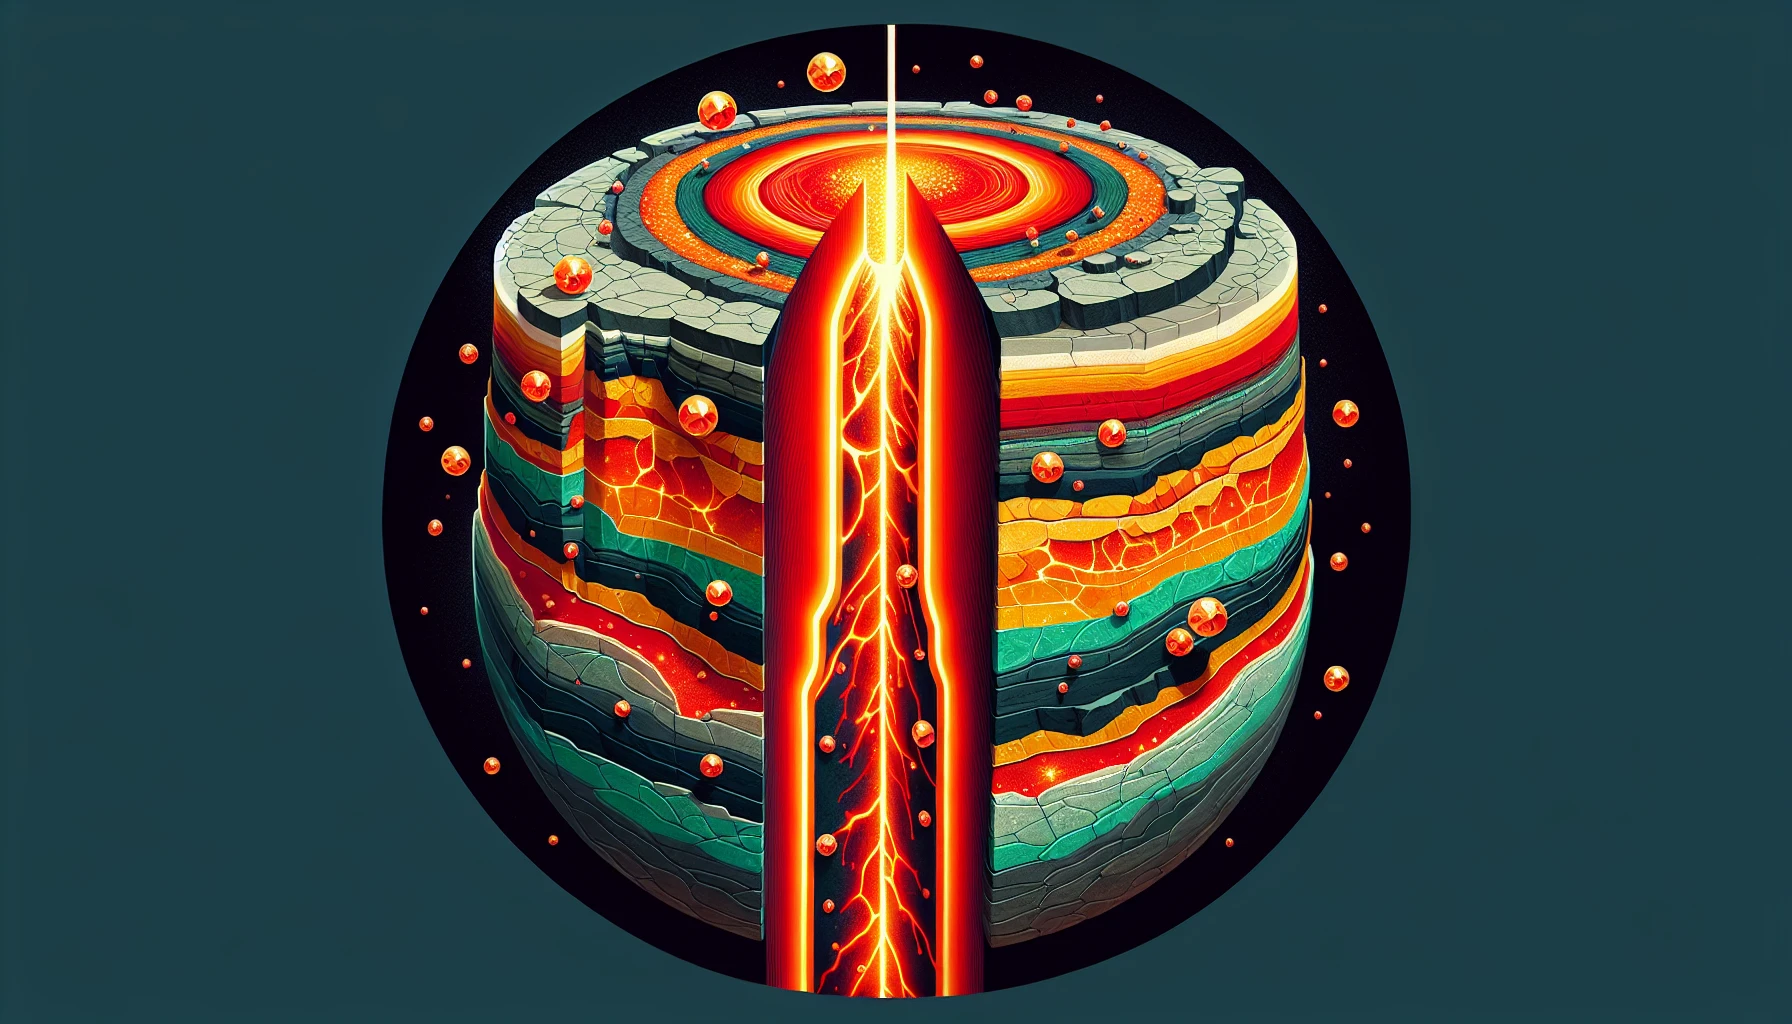 Illustration of the Earth's mantle with rising magma and kimberlite formation